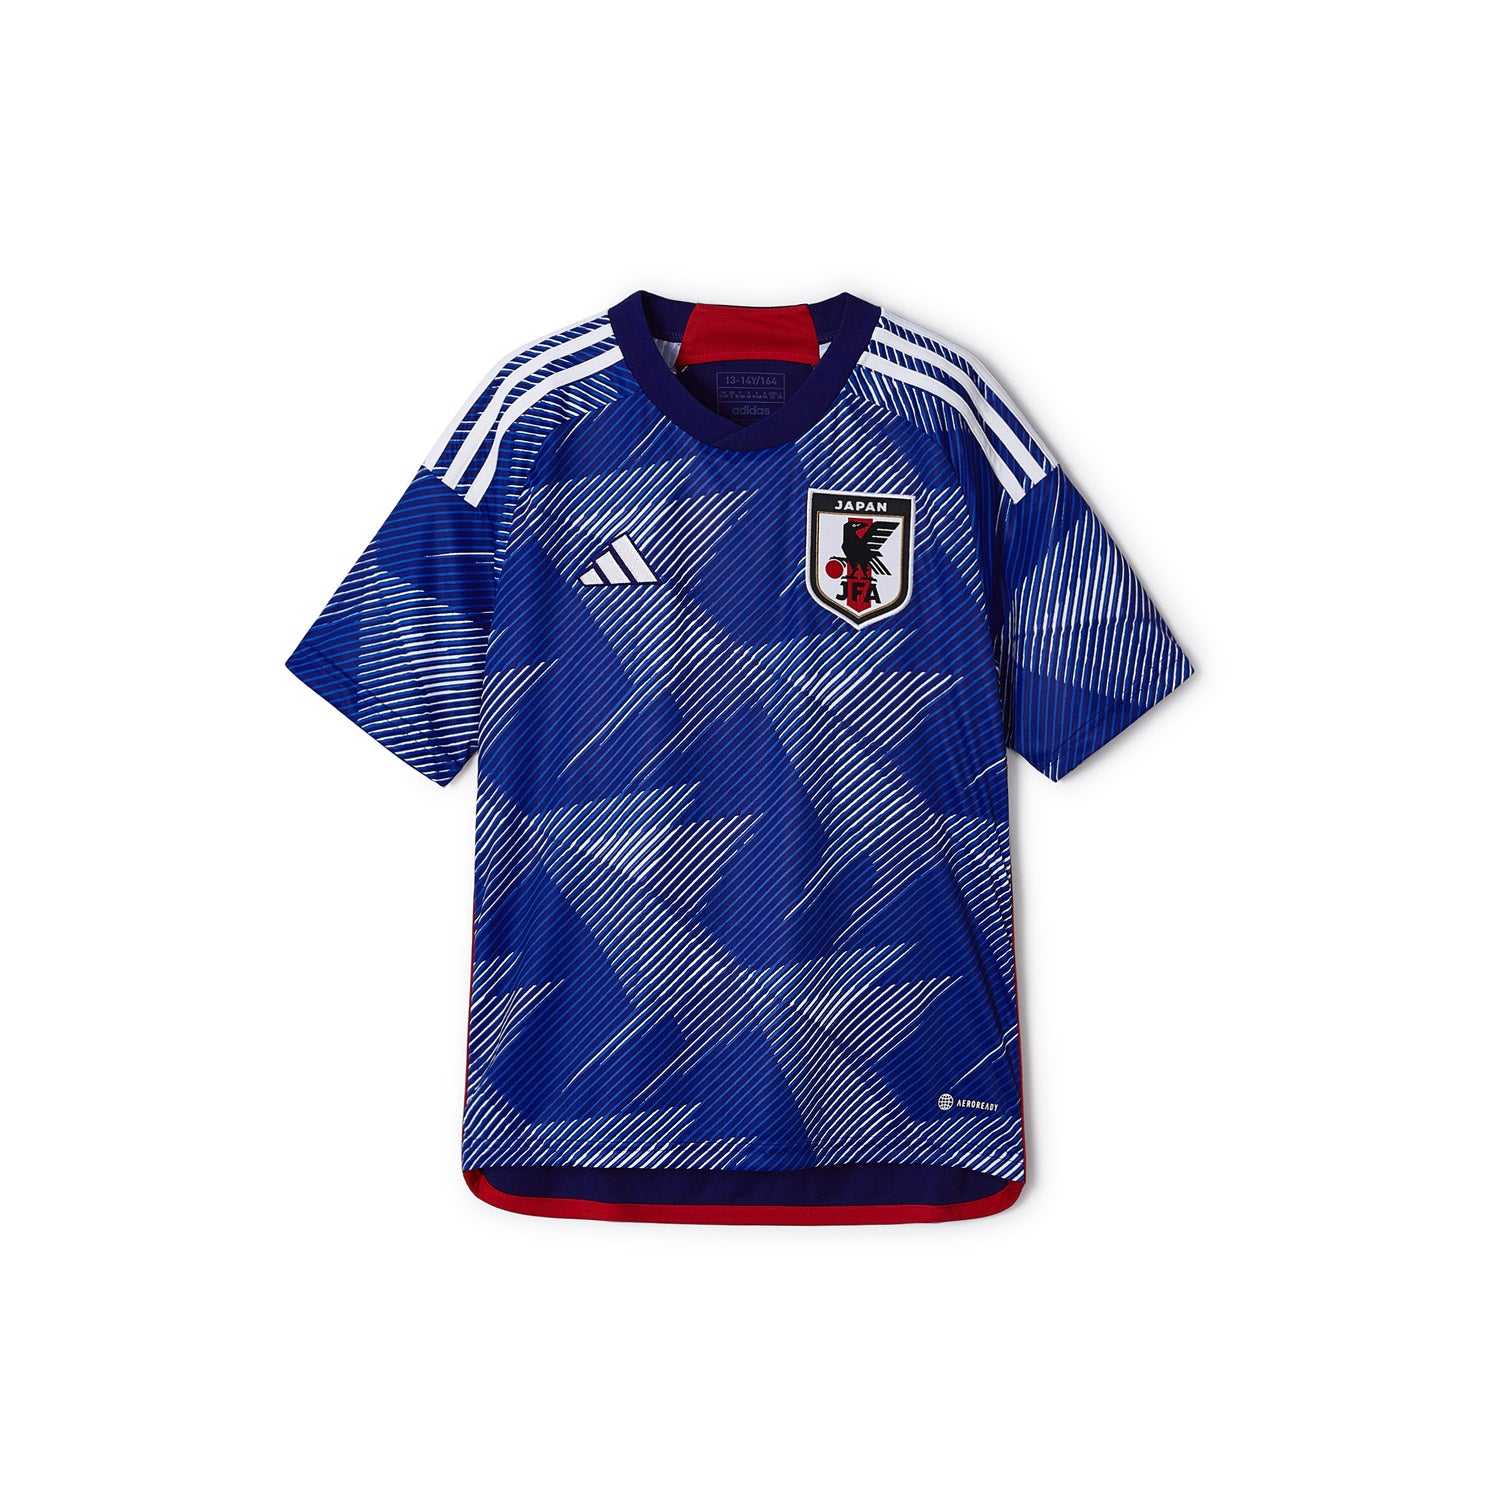 Japan 22 Home Jersey - Youth